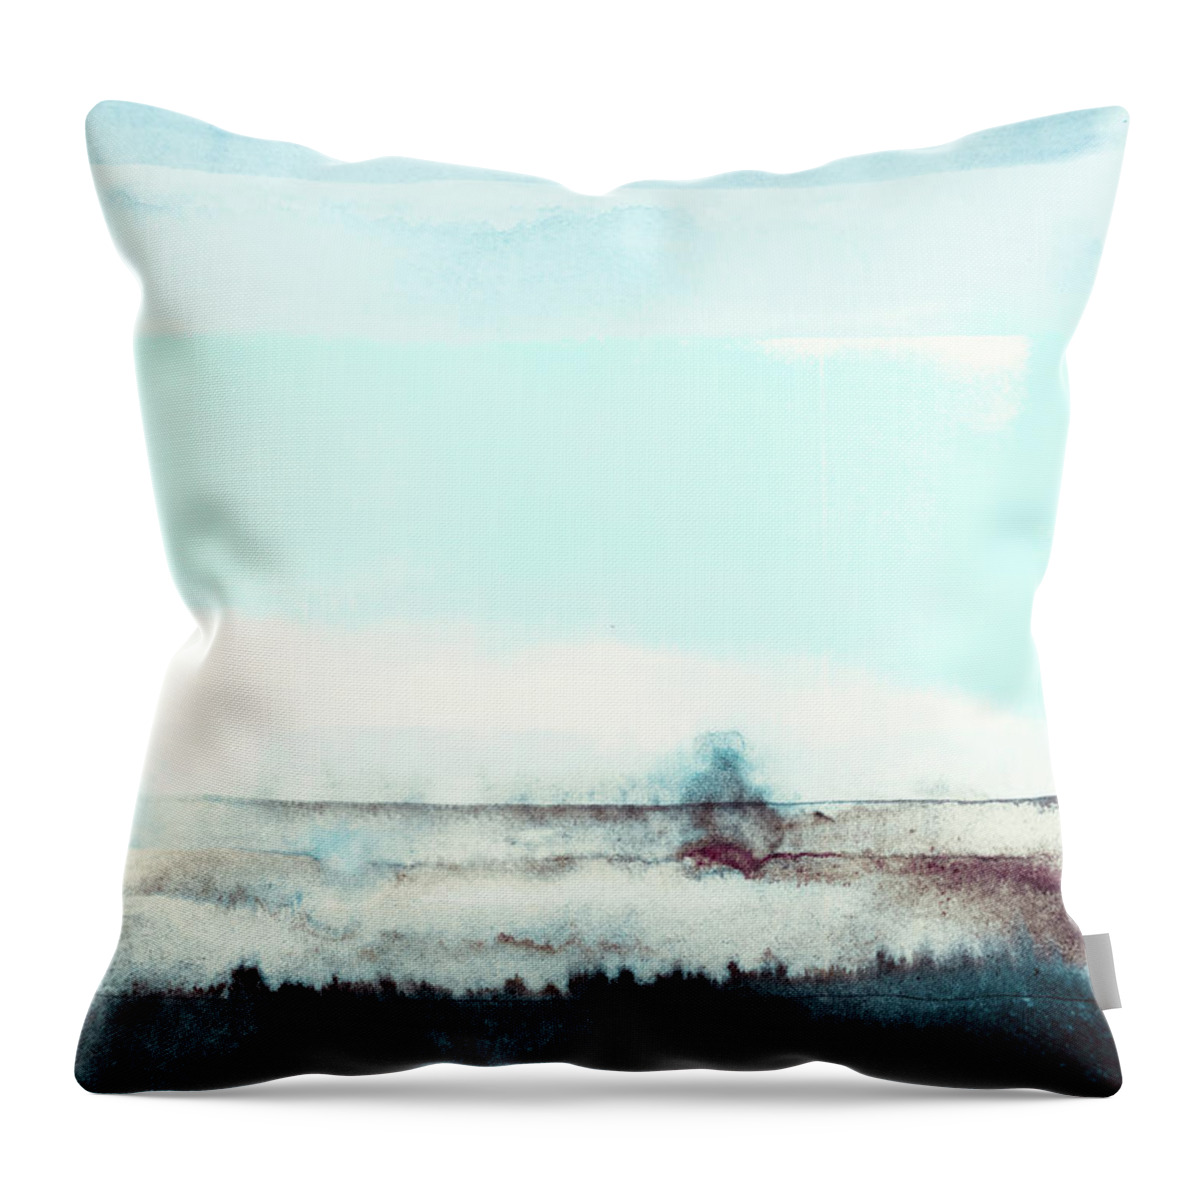 Abstract Throw Pillow featuring the painting Winter Mountain Mist - Abstract Landscape Panting In Blue White Brown and Indigo Colors by Modern Abstract